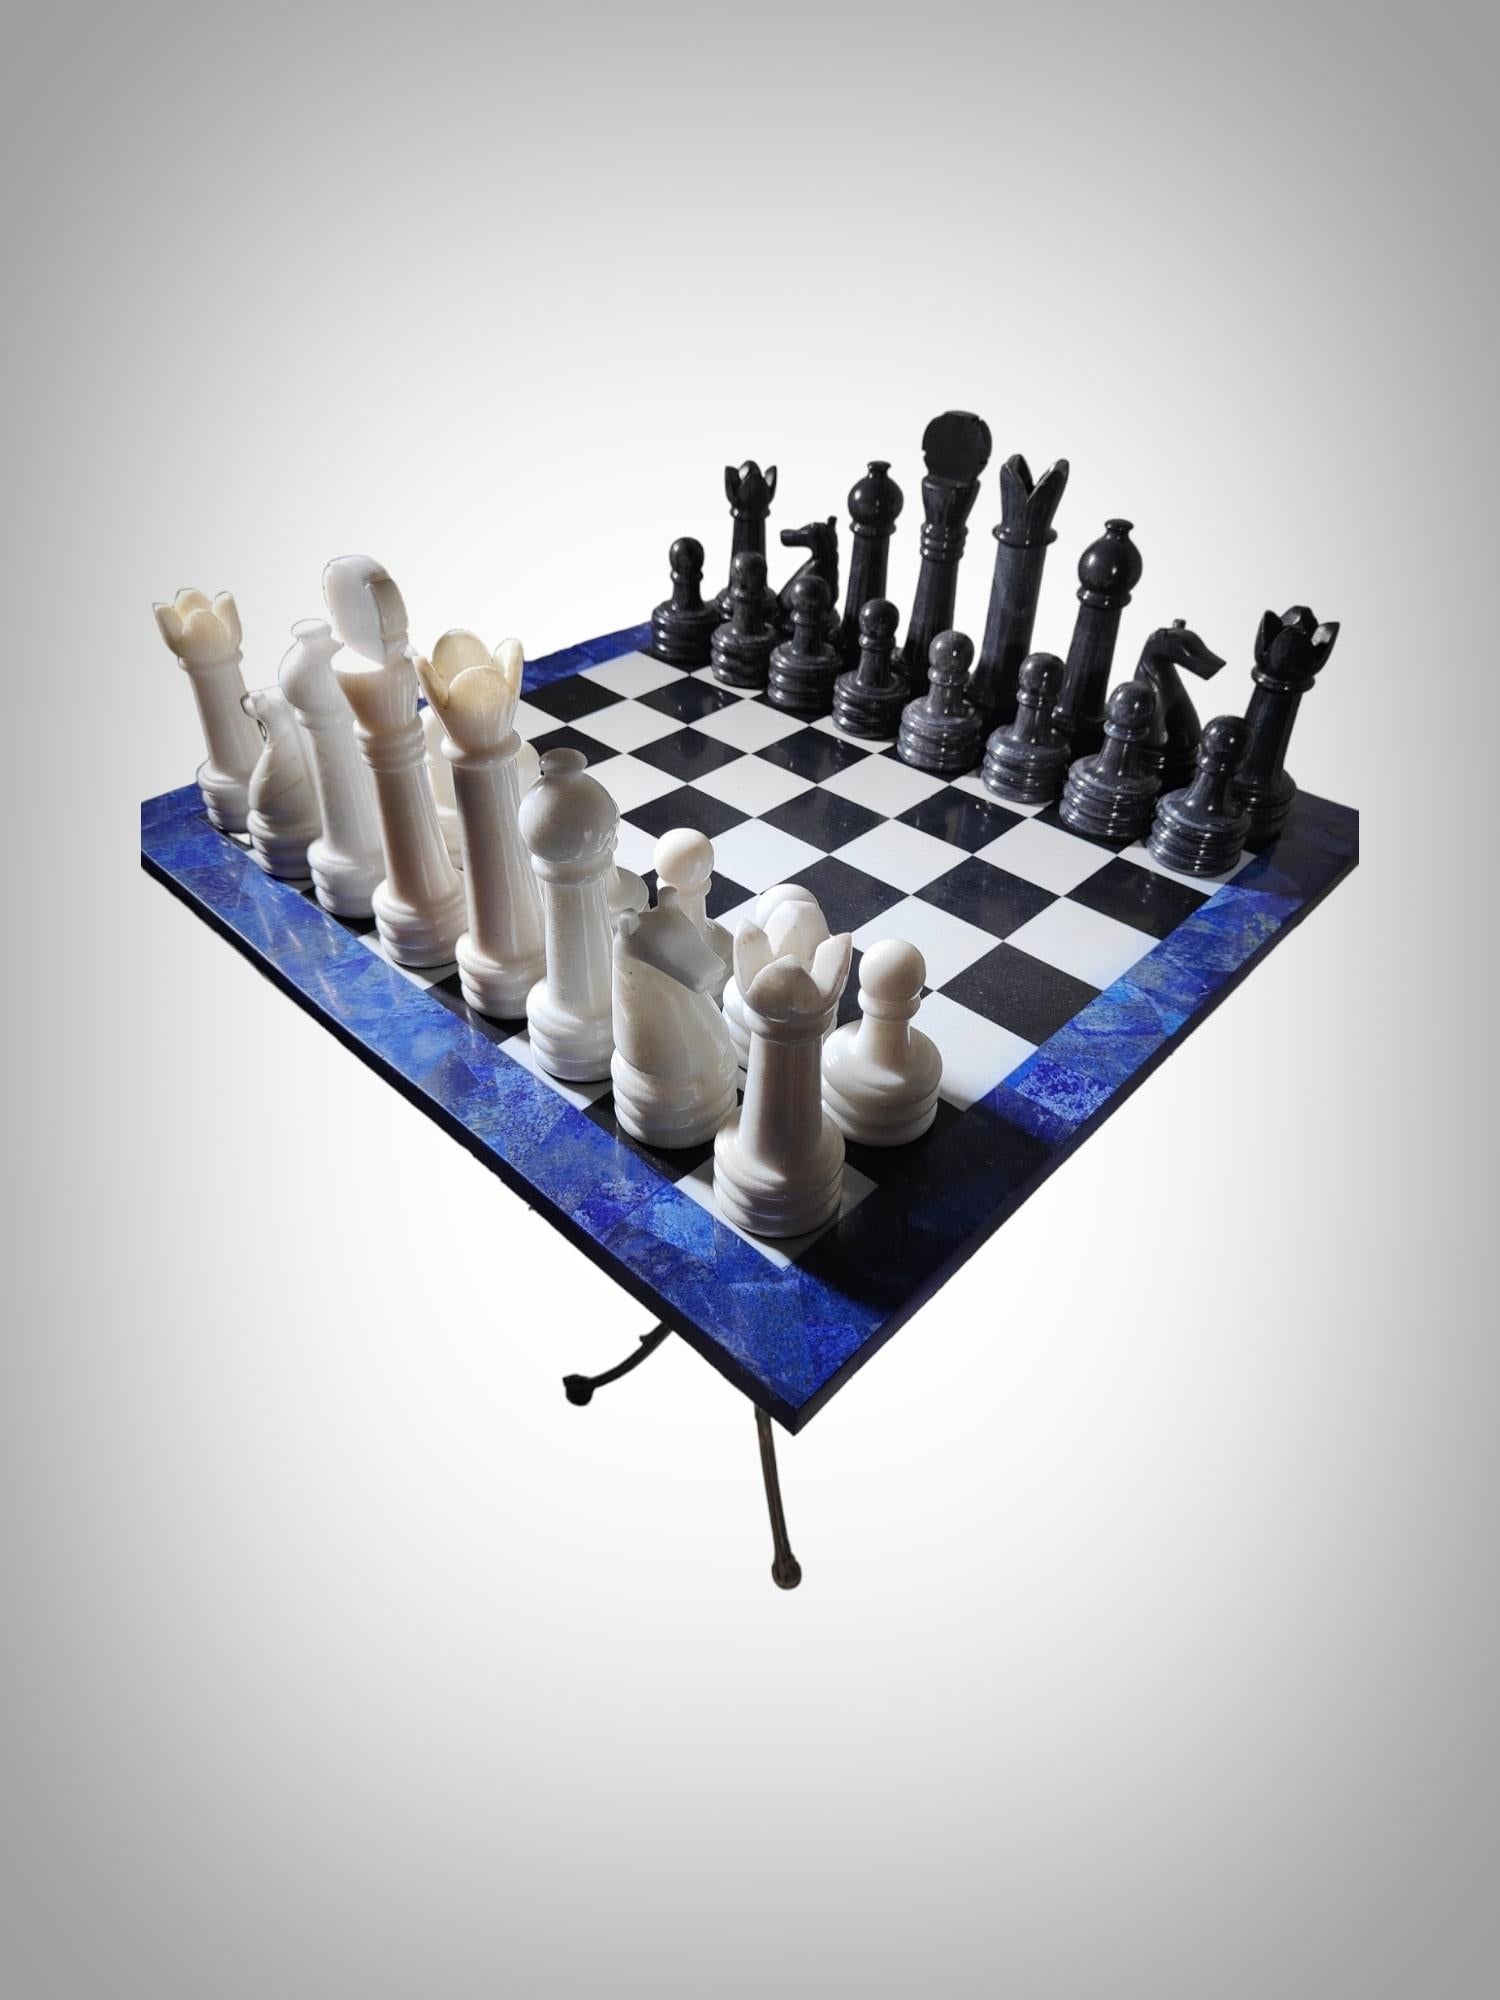 Italian Chess Table from the 1950s - Lapis Lazuli, Marble, and Dragon-Shaped  For Sale 5